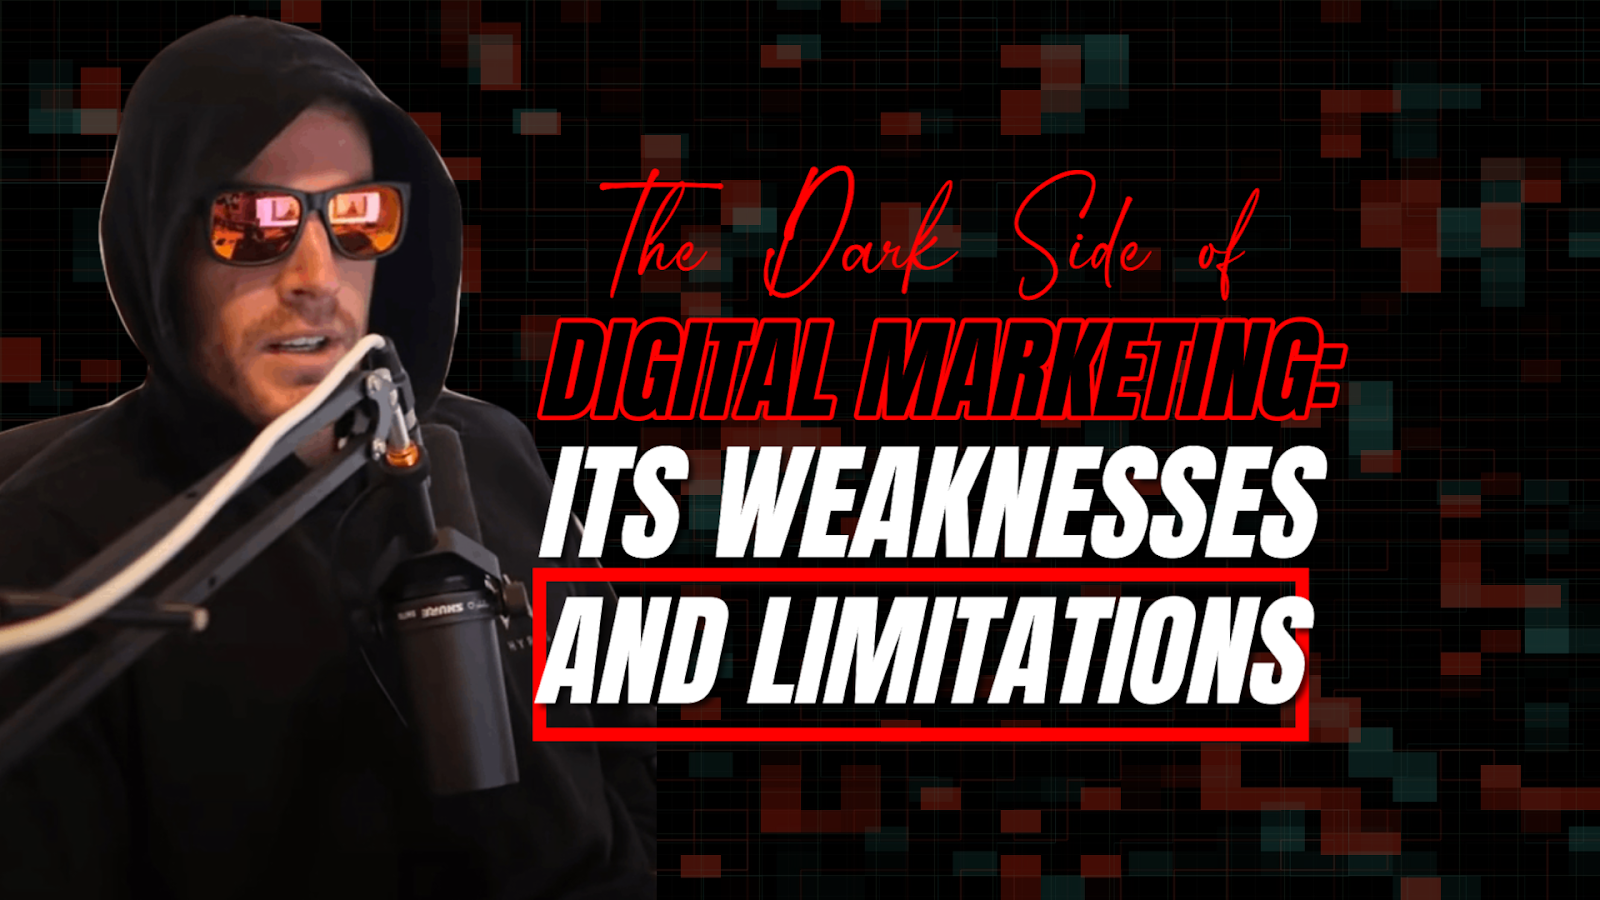 The Dark Side of Digital Marketing: Its Weaknesses and Limitations